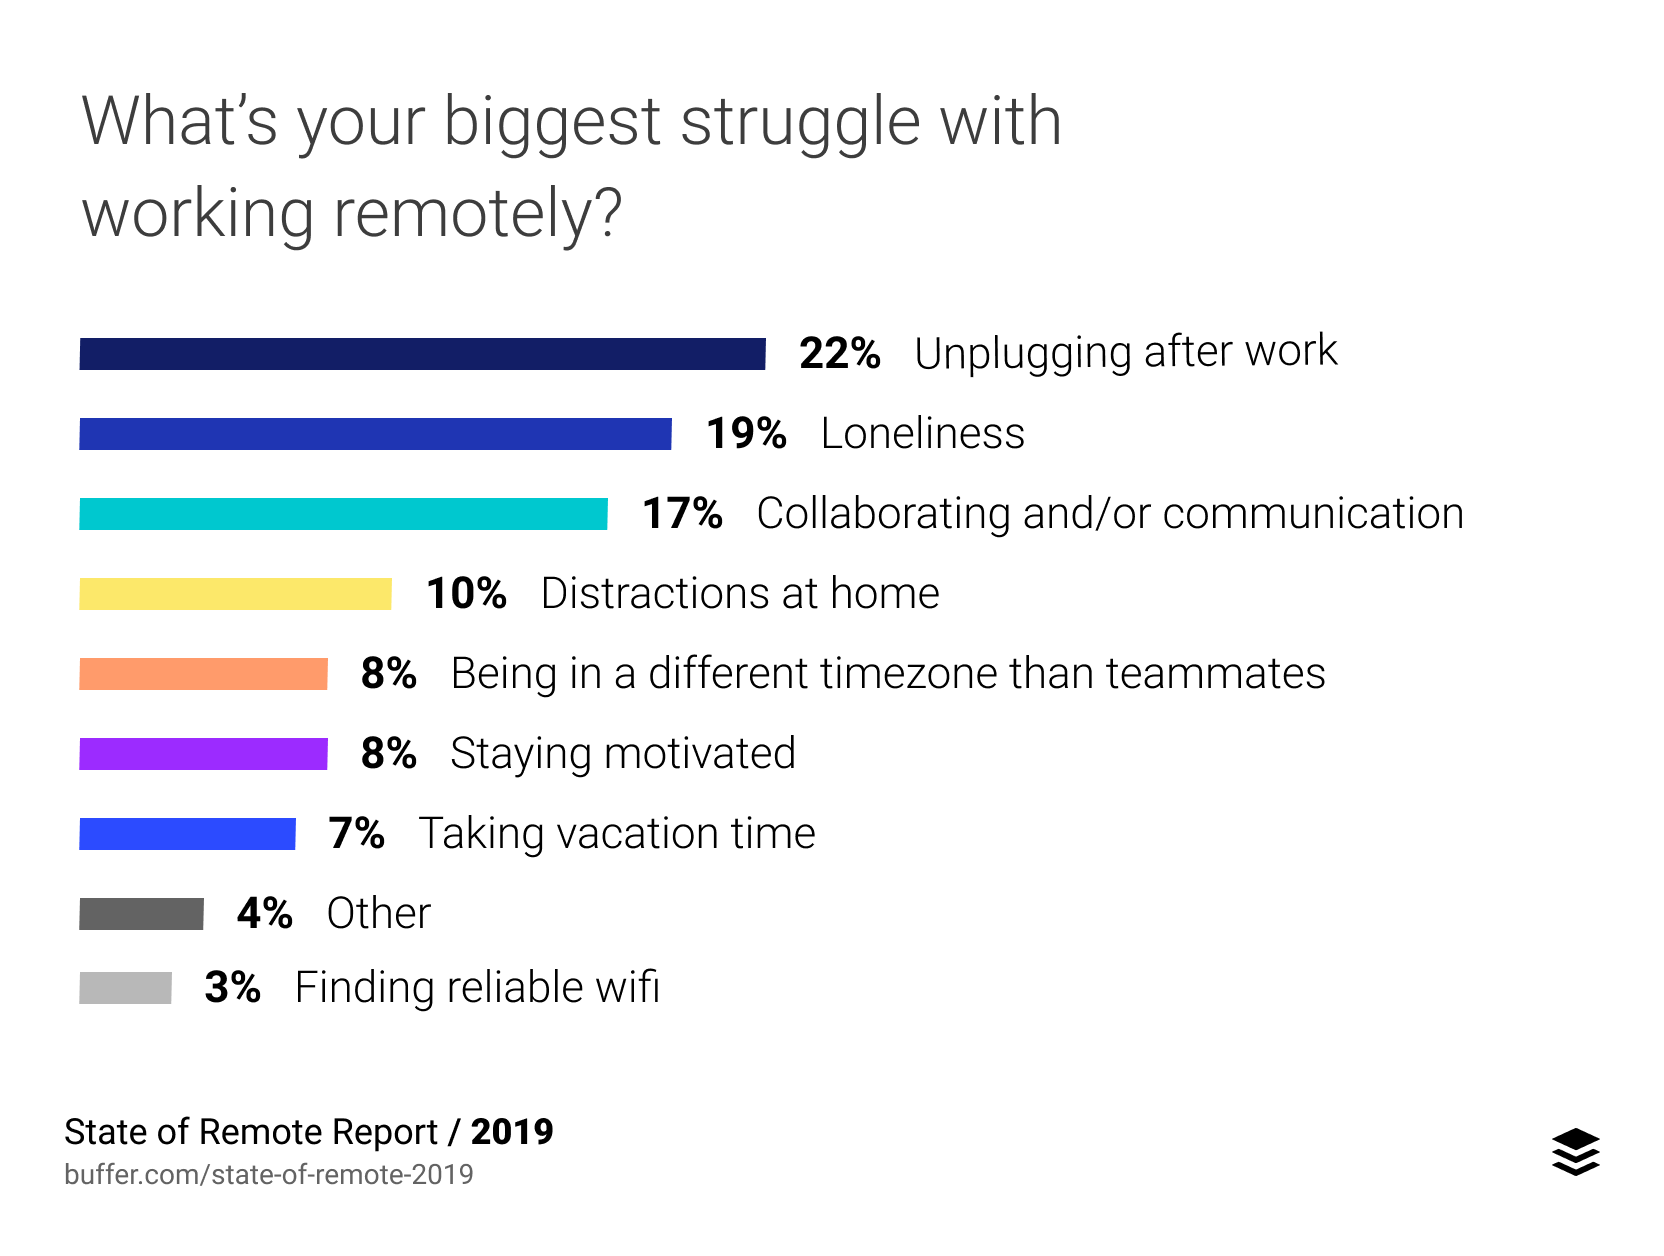 What’s your biggest struggle with working remotely?